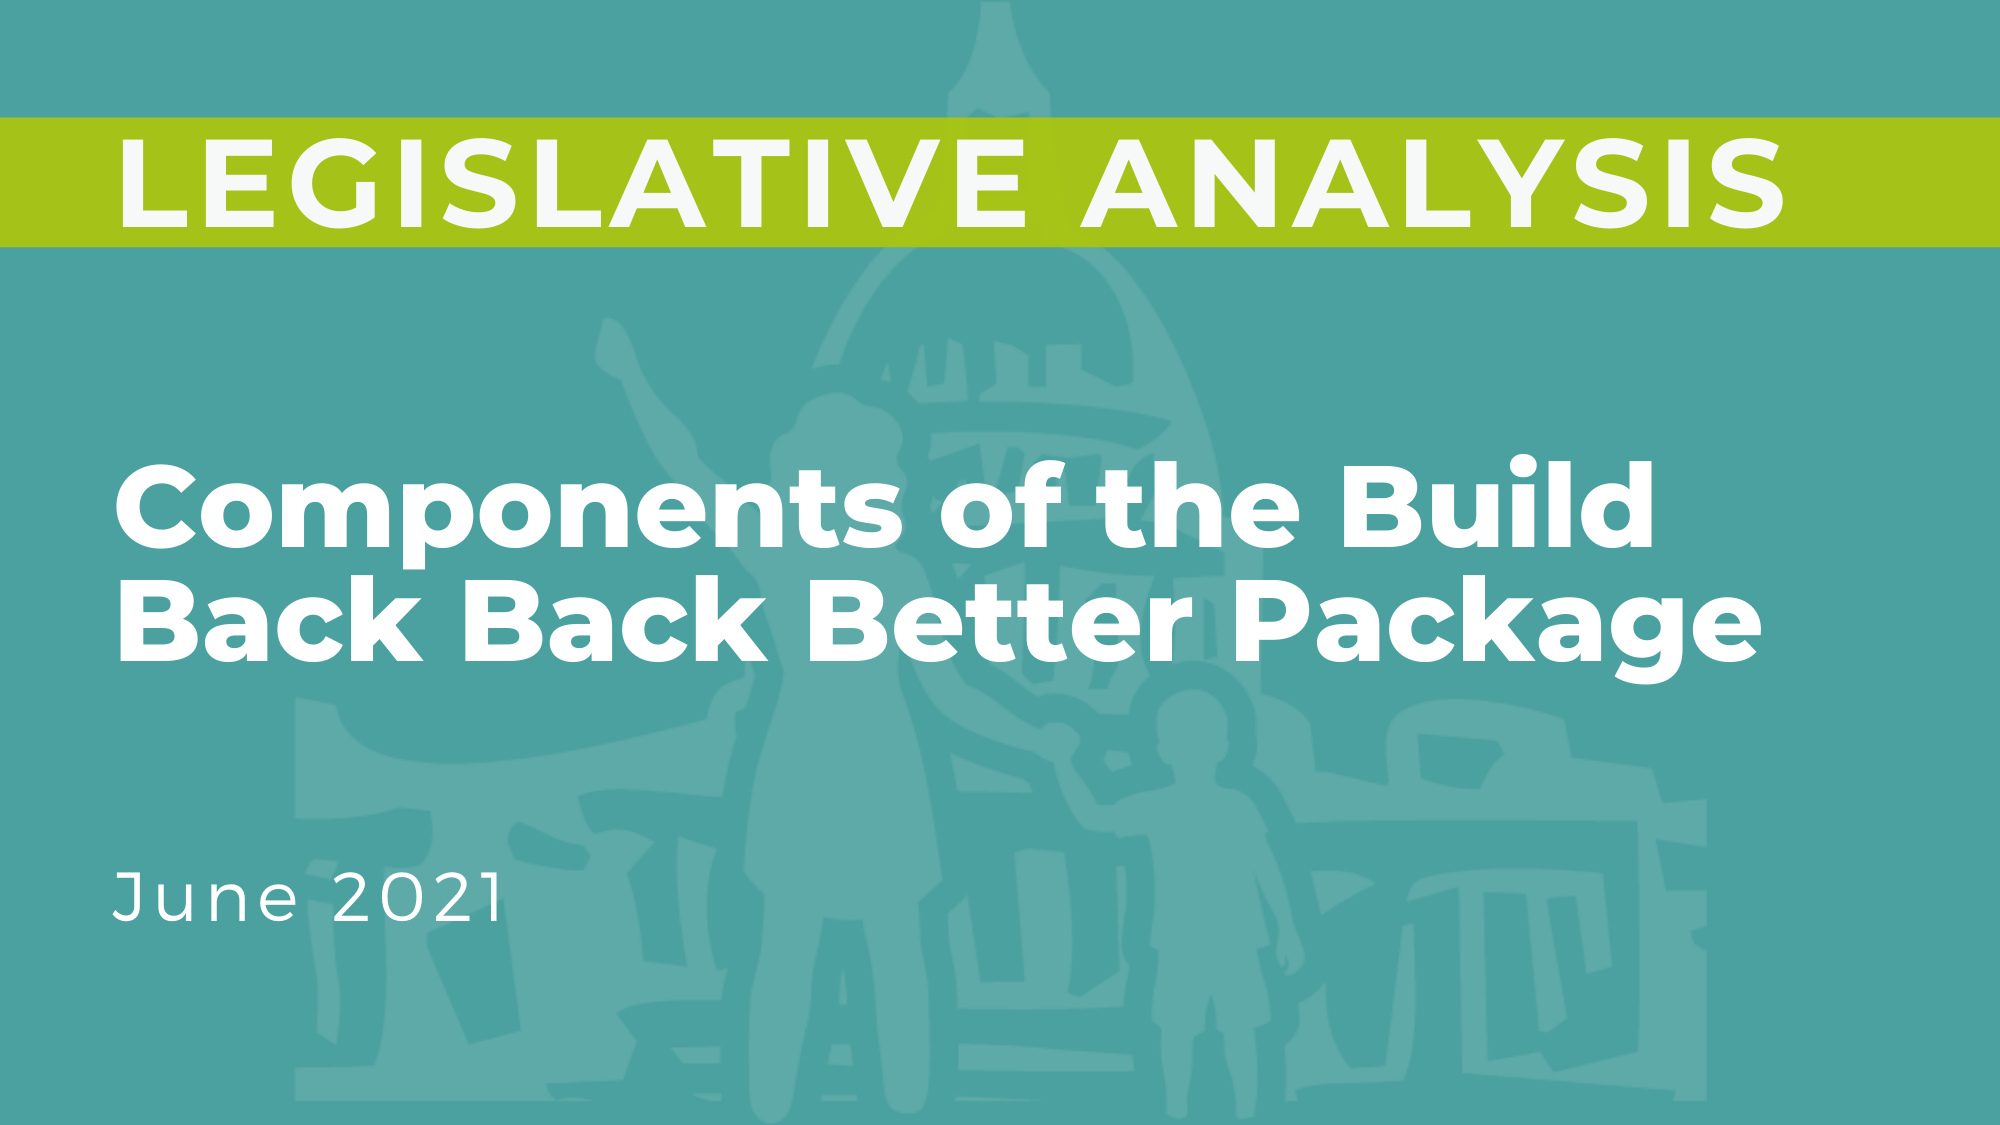 Components of the Build Back Better Package